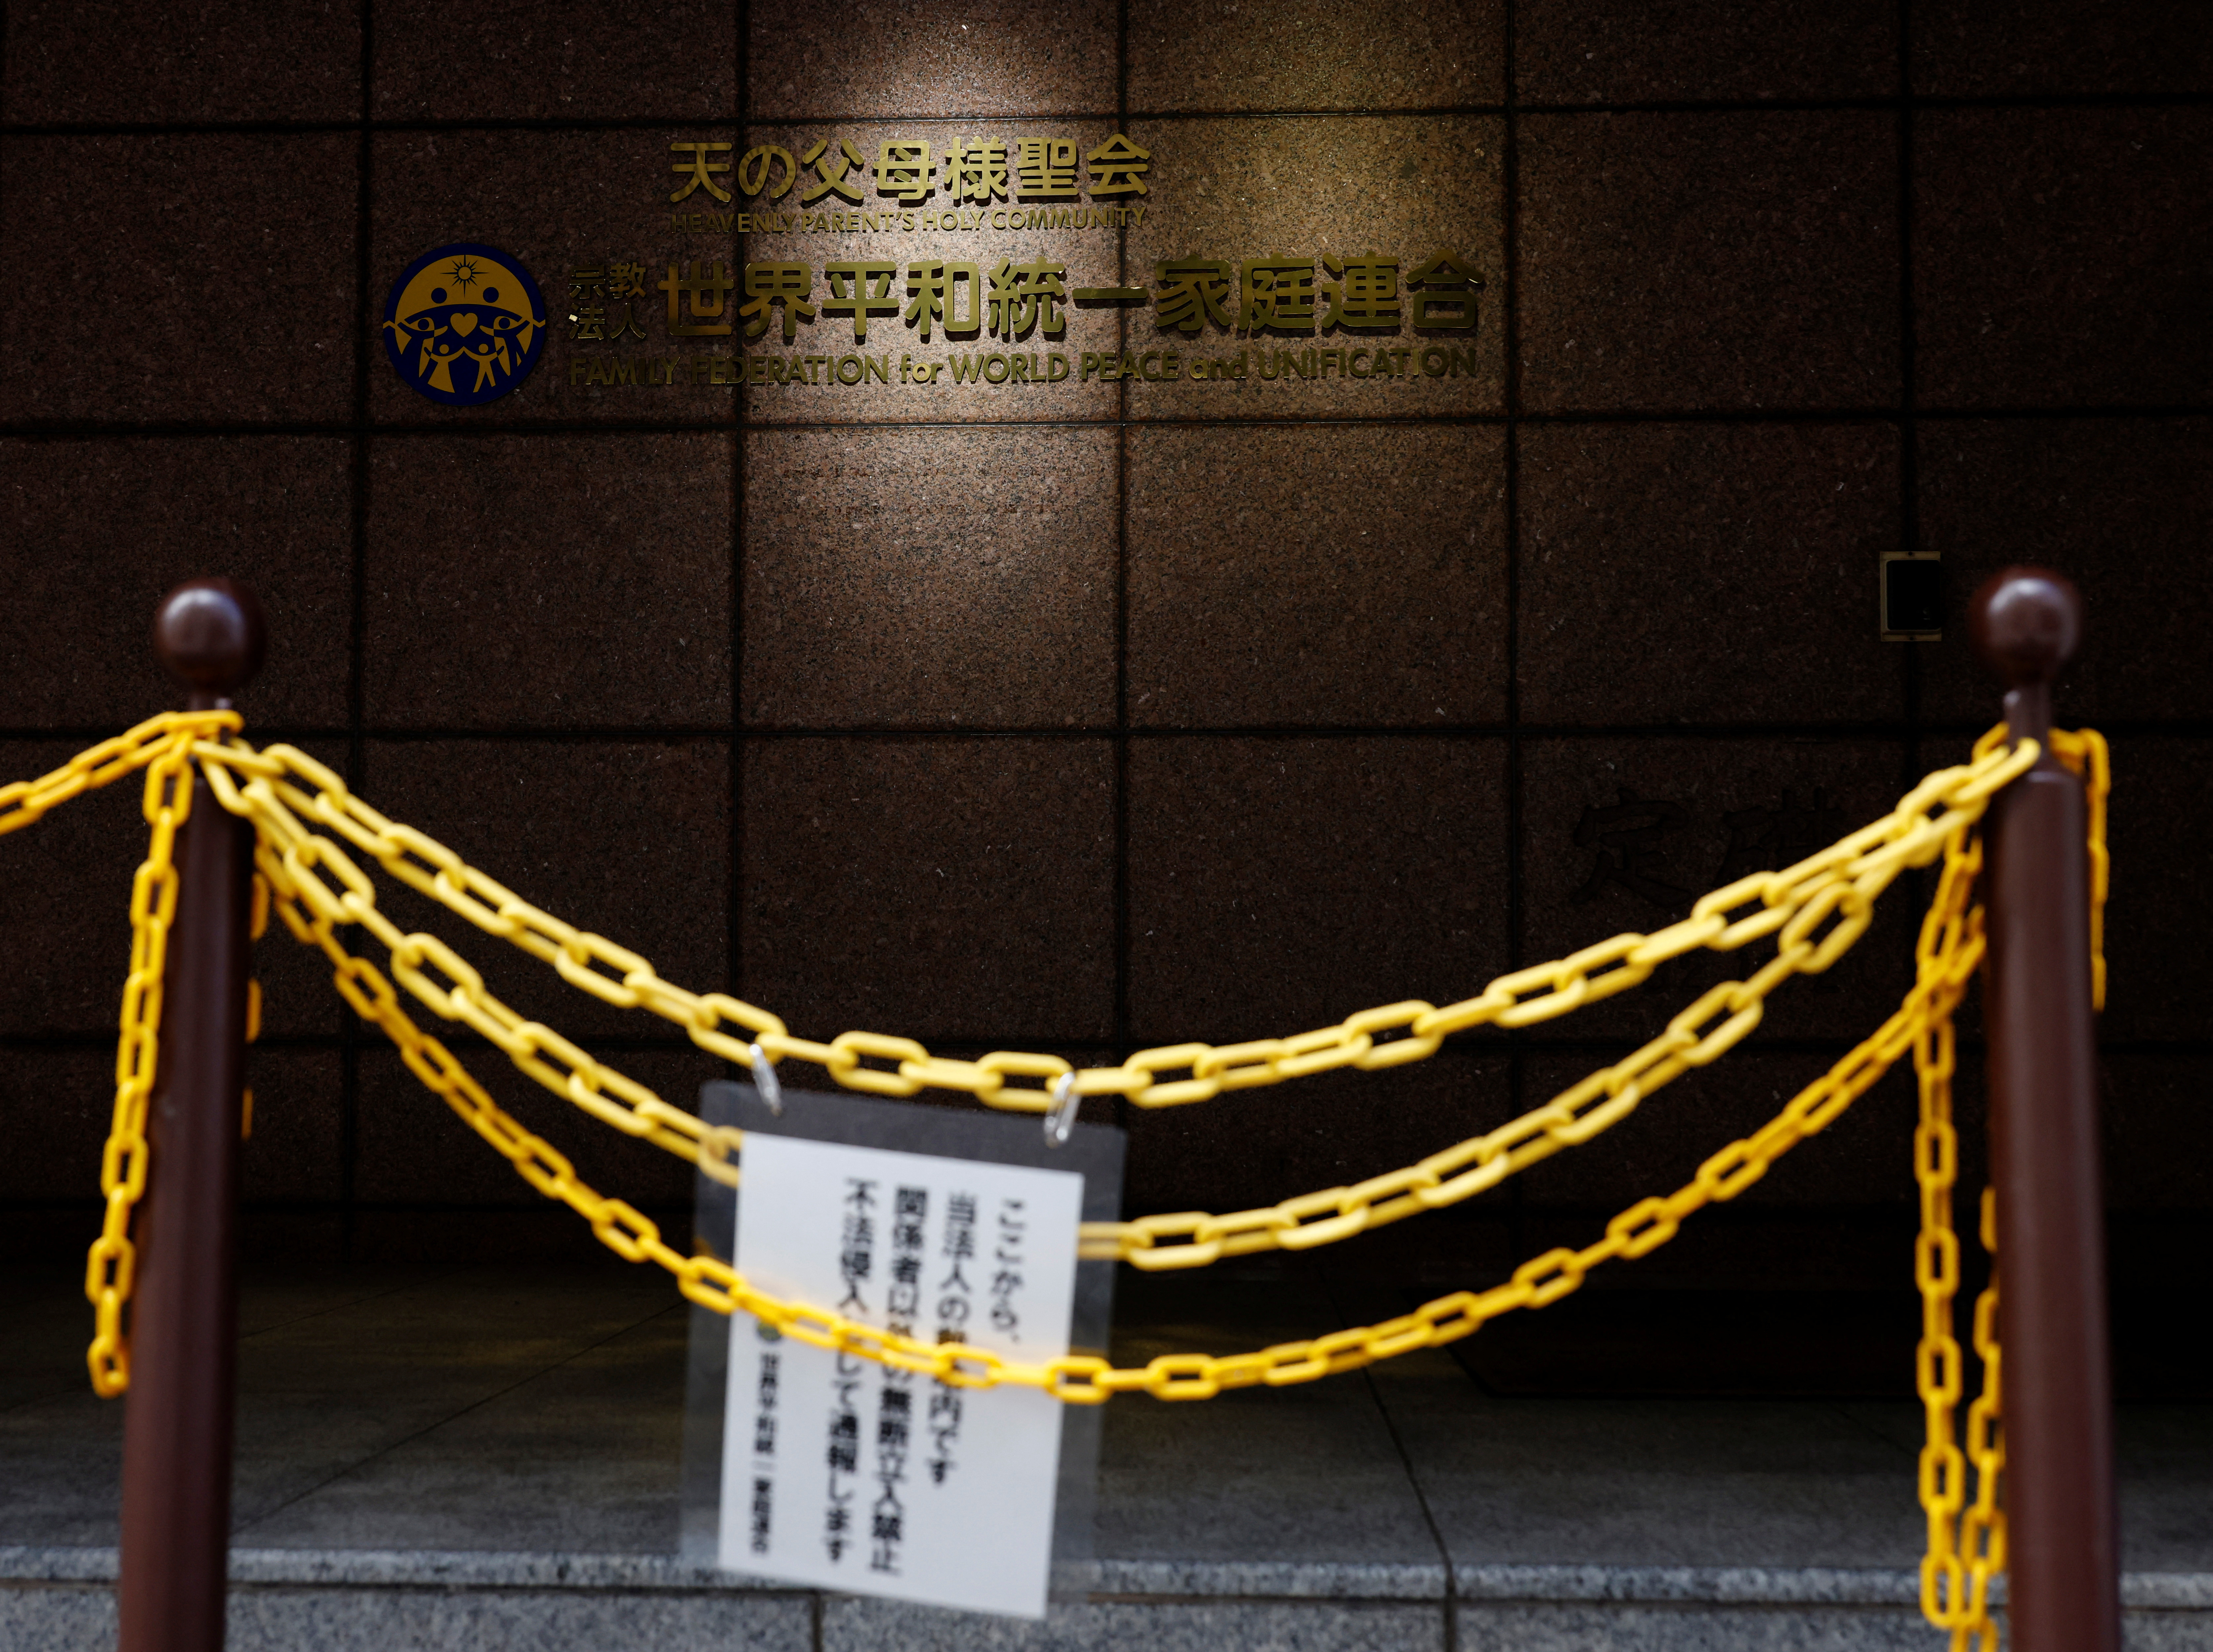 A no trespassing sign is placed outside the Unification Church in Tokyo